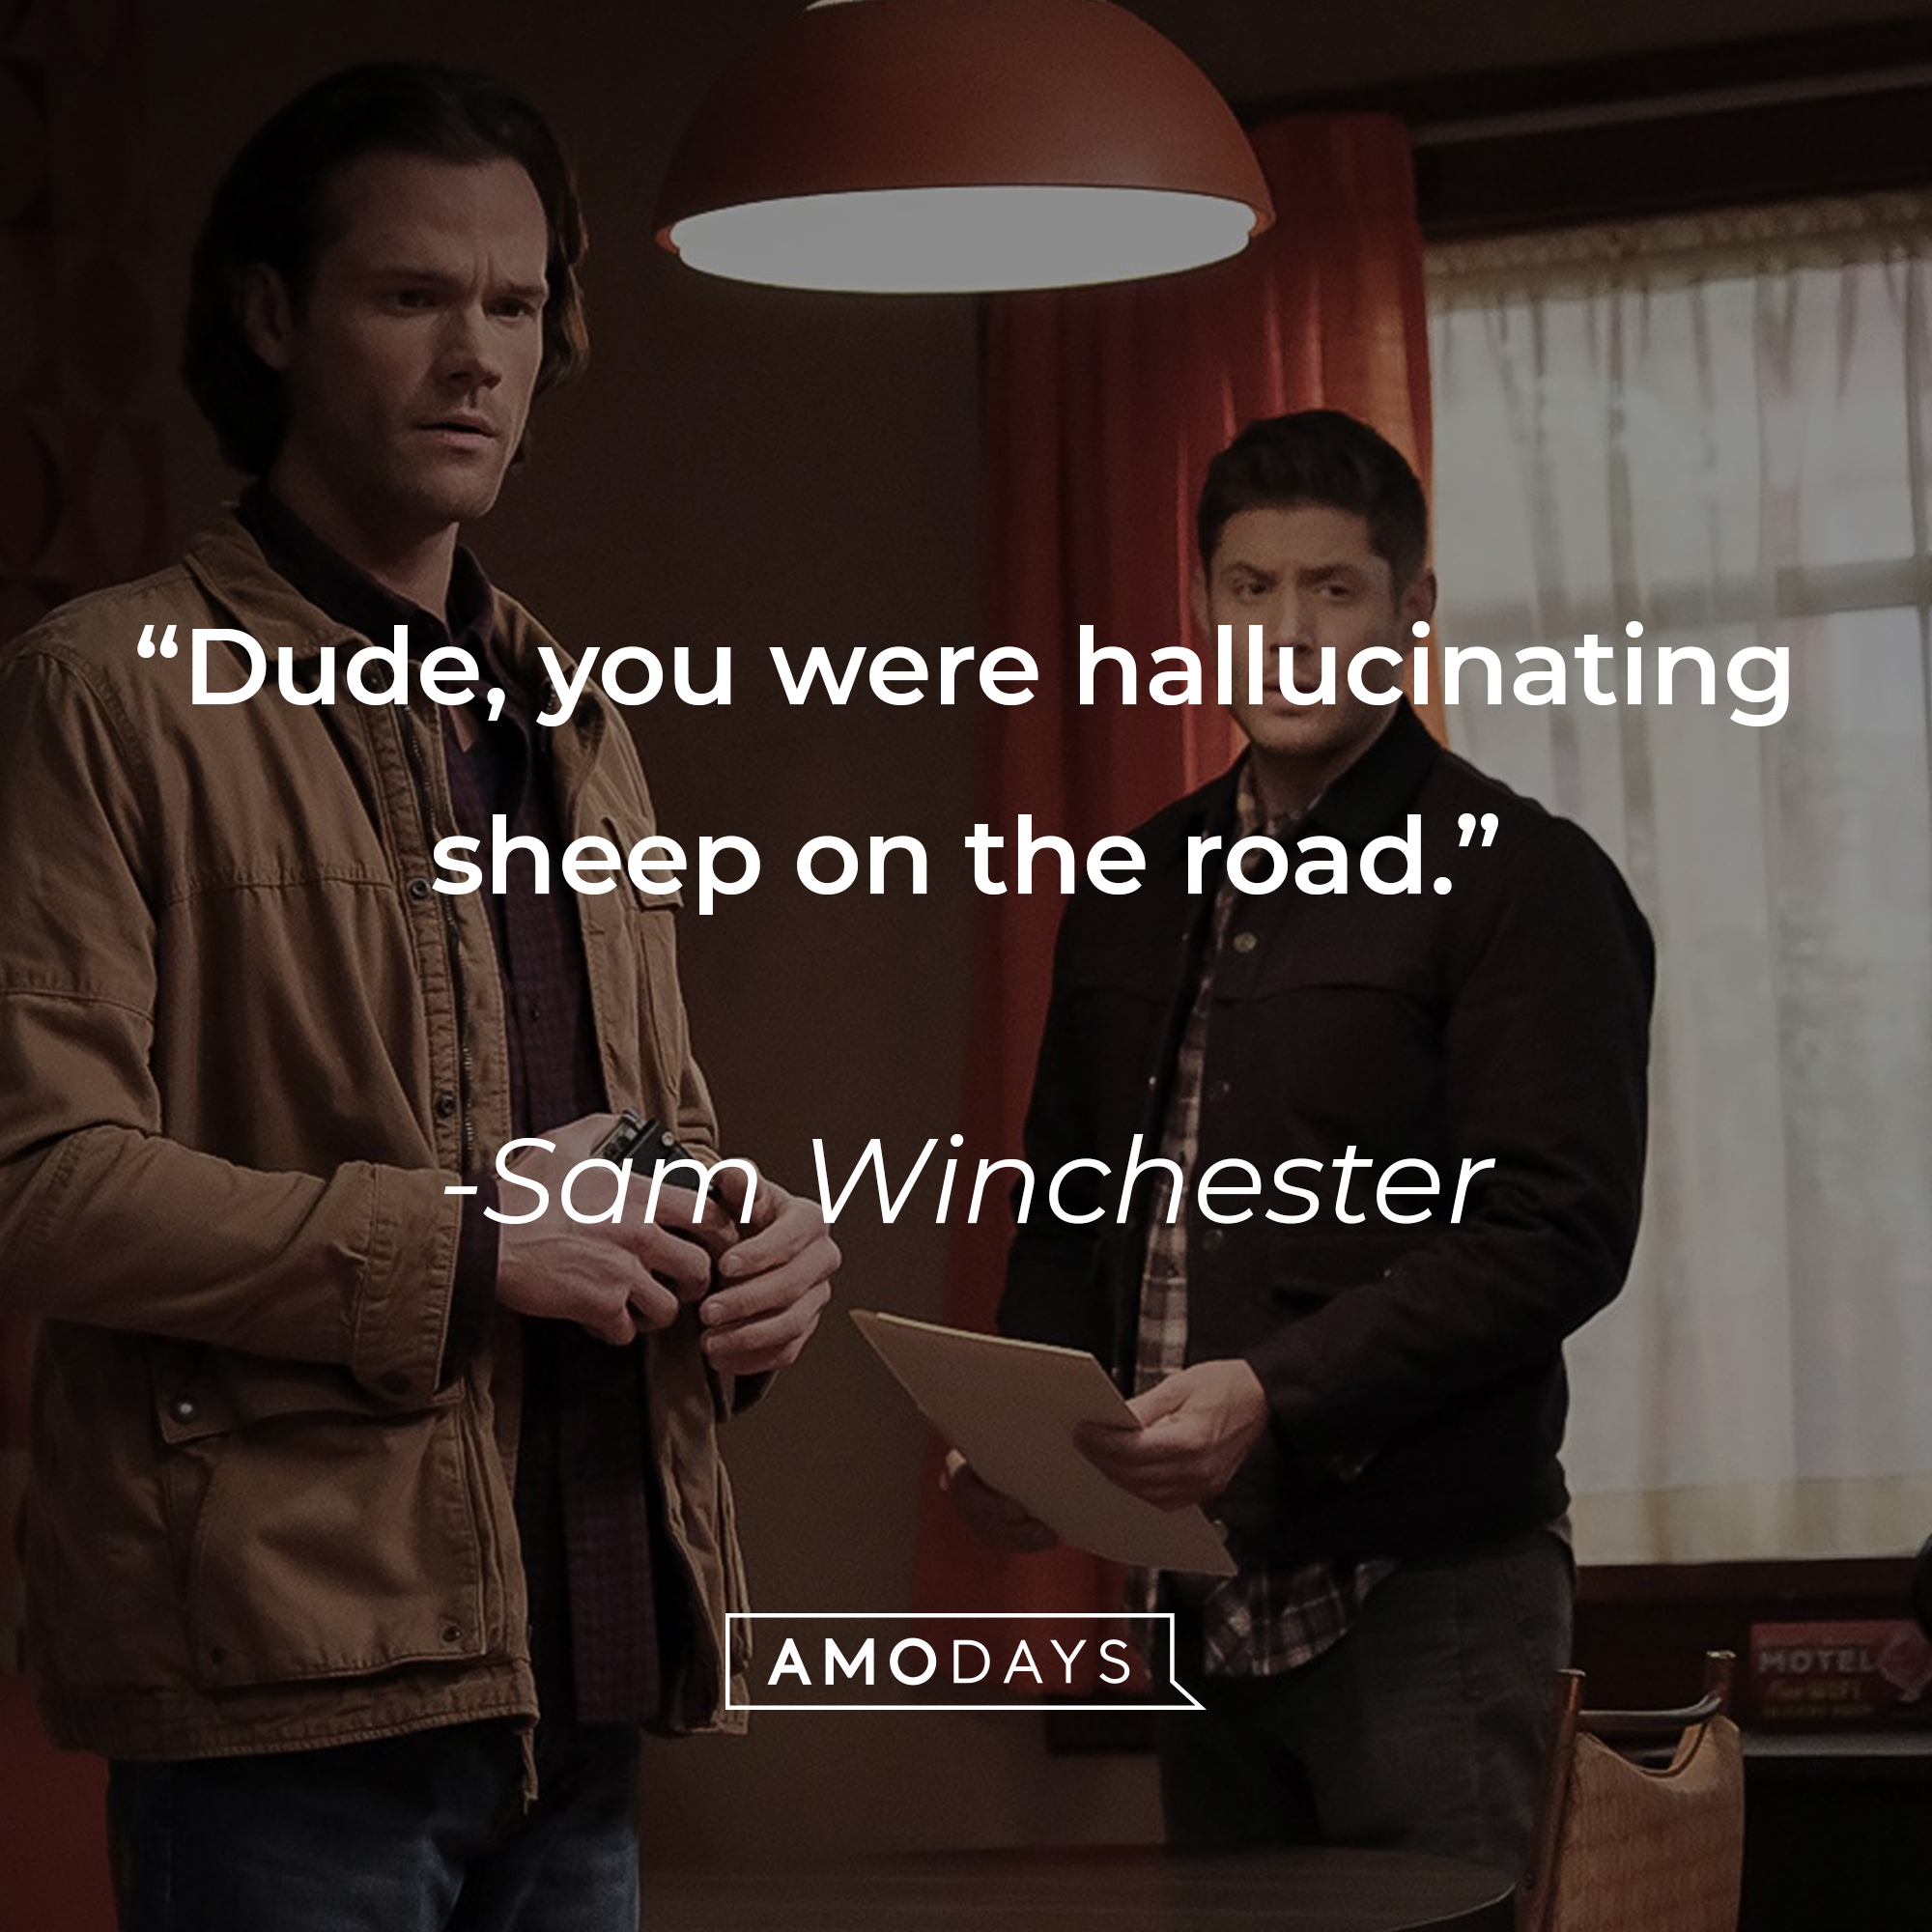 Sam Winchester's quote: "Dude, you were hallucinating sheep on the road." | Source: Facebook.com/Supernatural